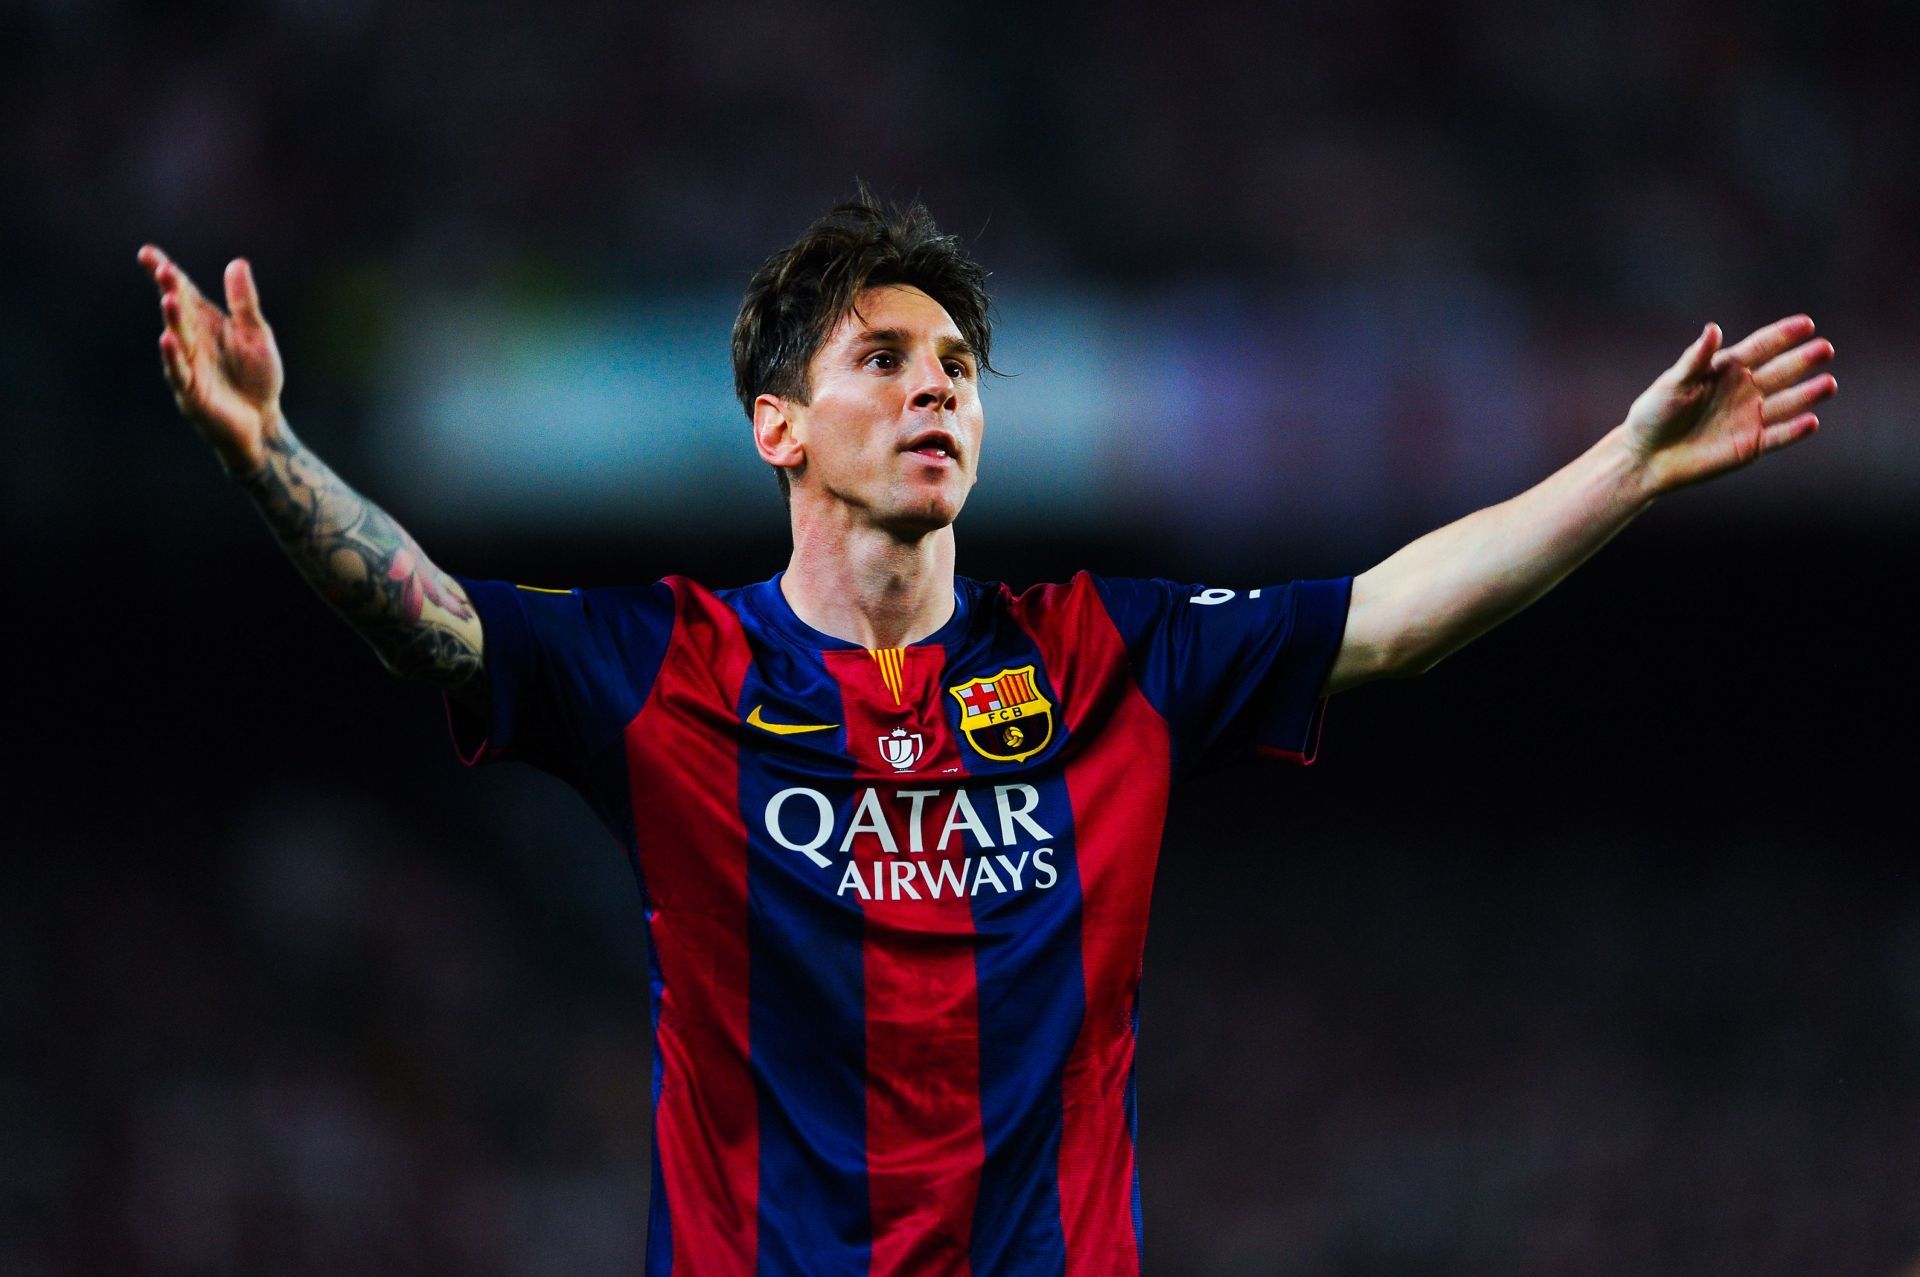 Lionel Messi in Barcelona v Athletic Club - Copa del Rey Final (Photo by David Ramos/Getty Images)